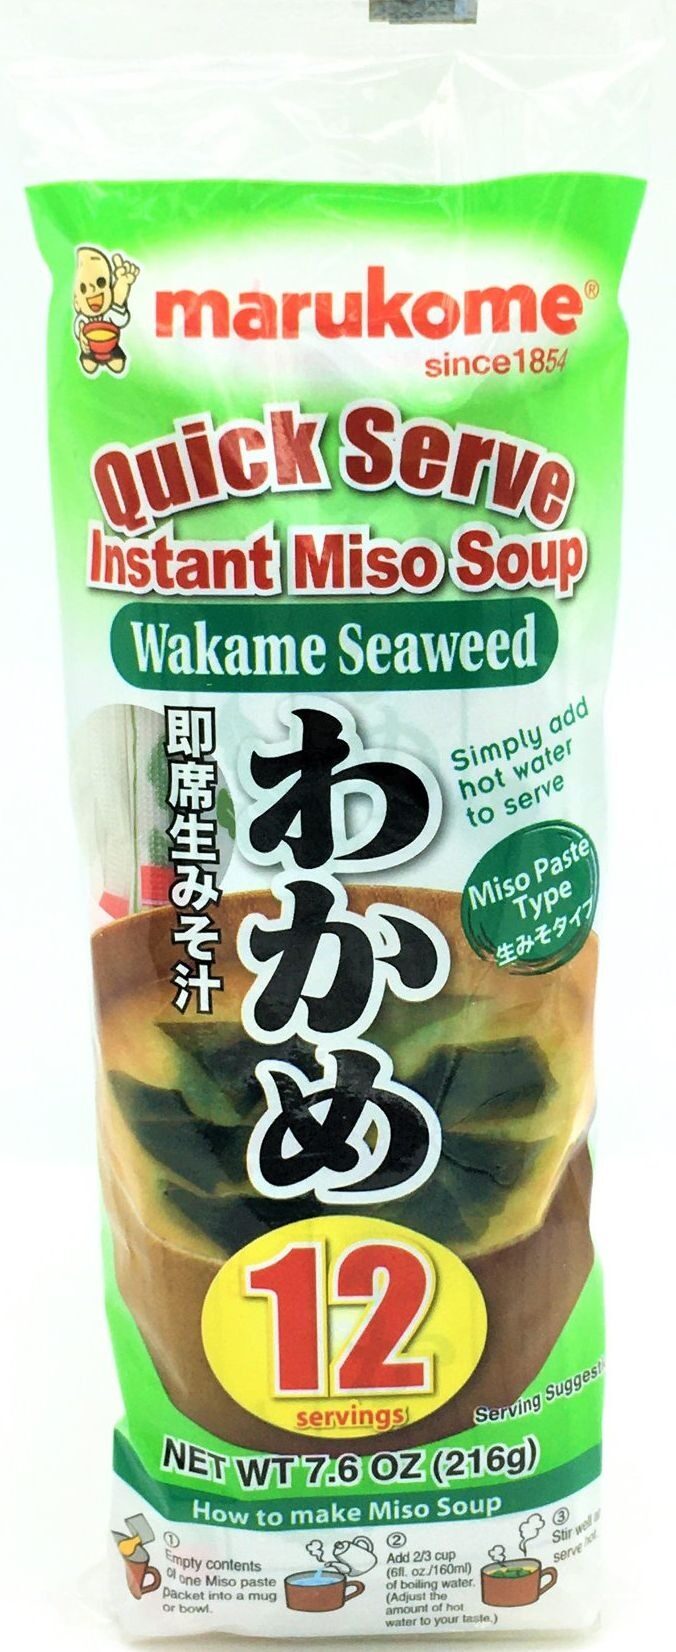 Marukome Miso Soup Wakame Seaweed, Instant - Produkt